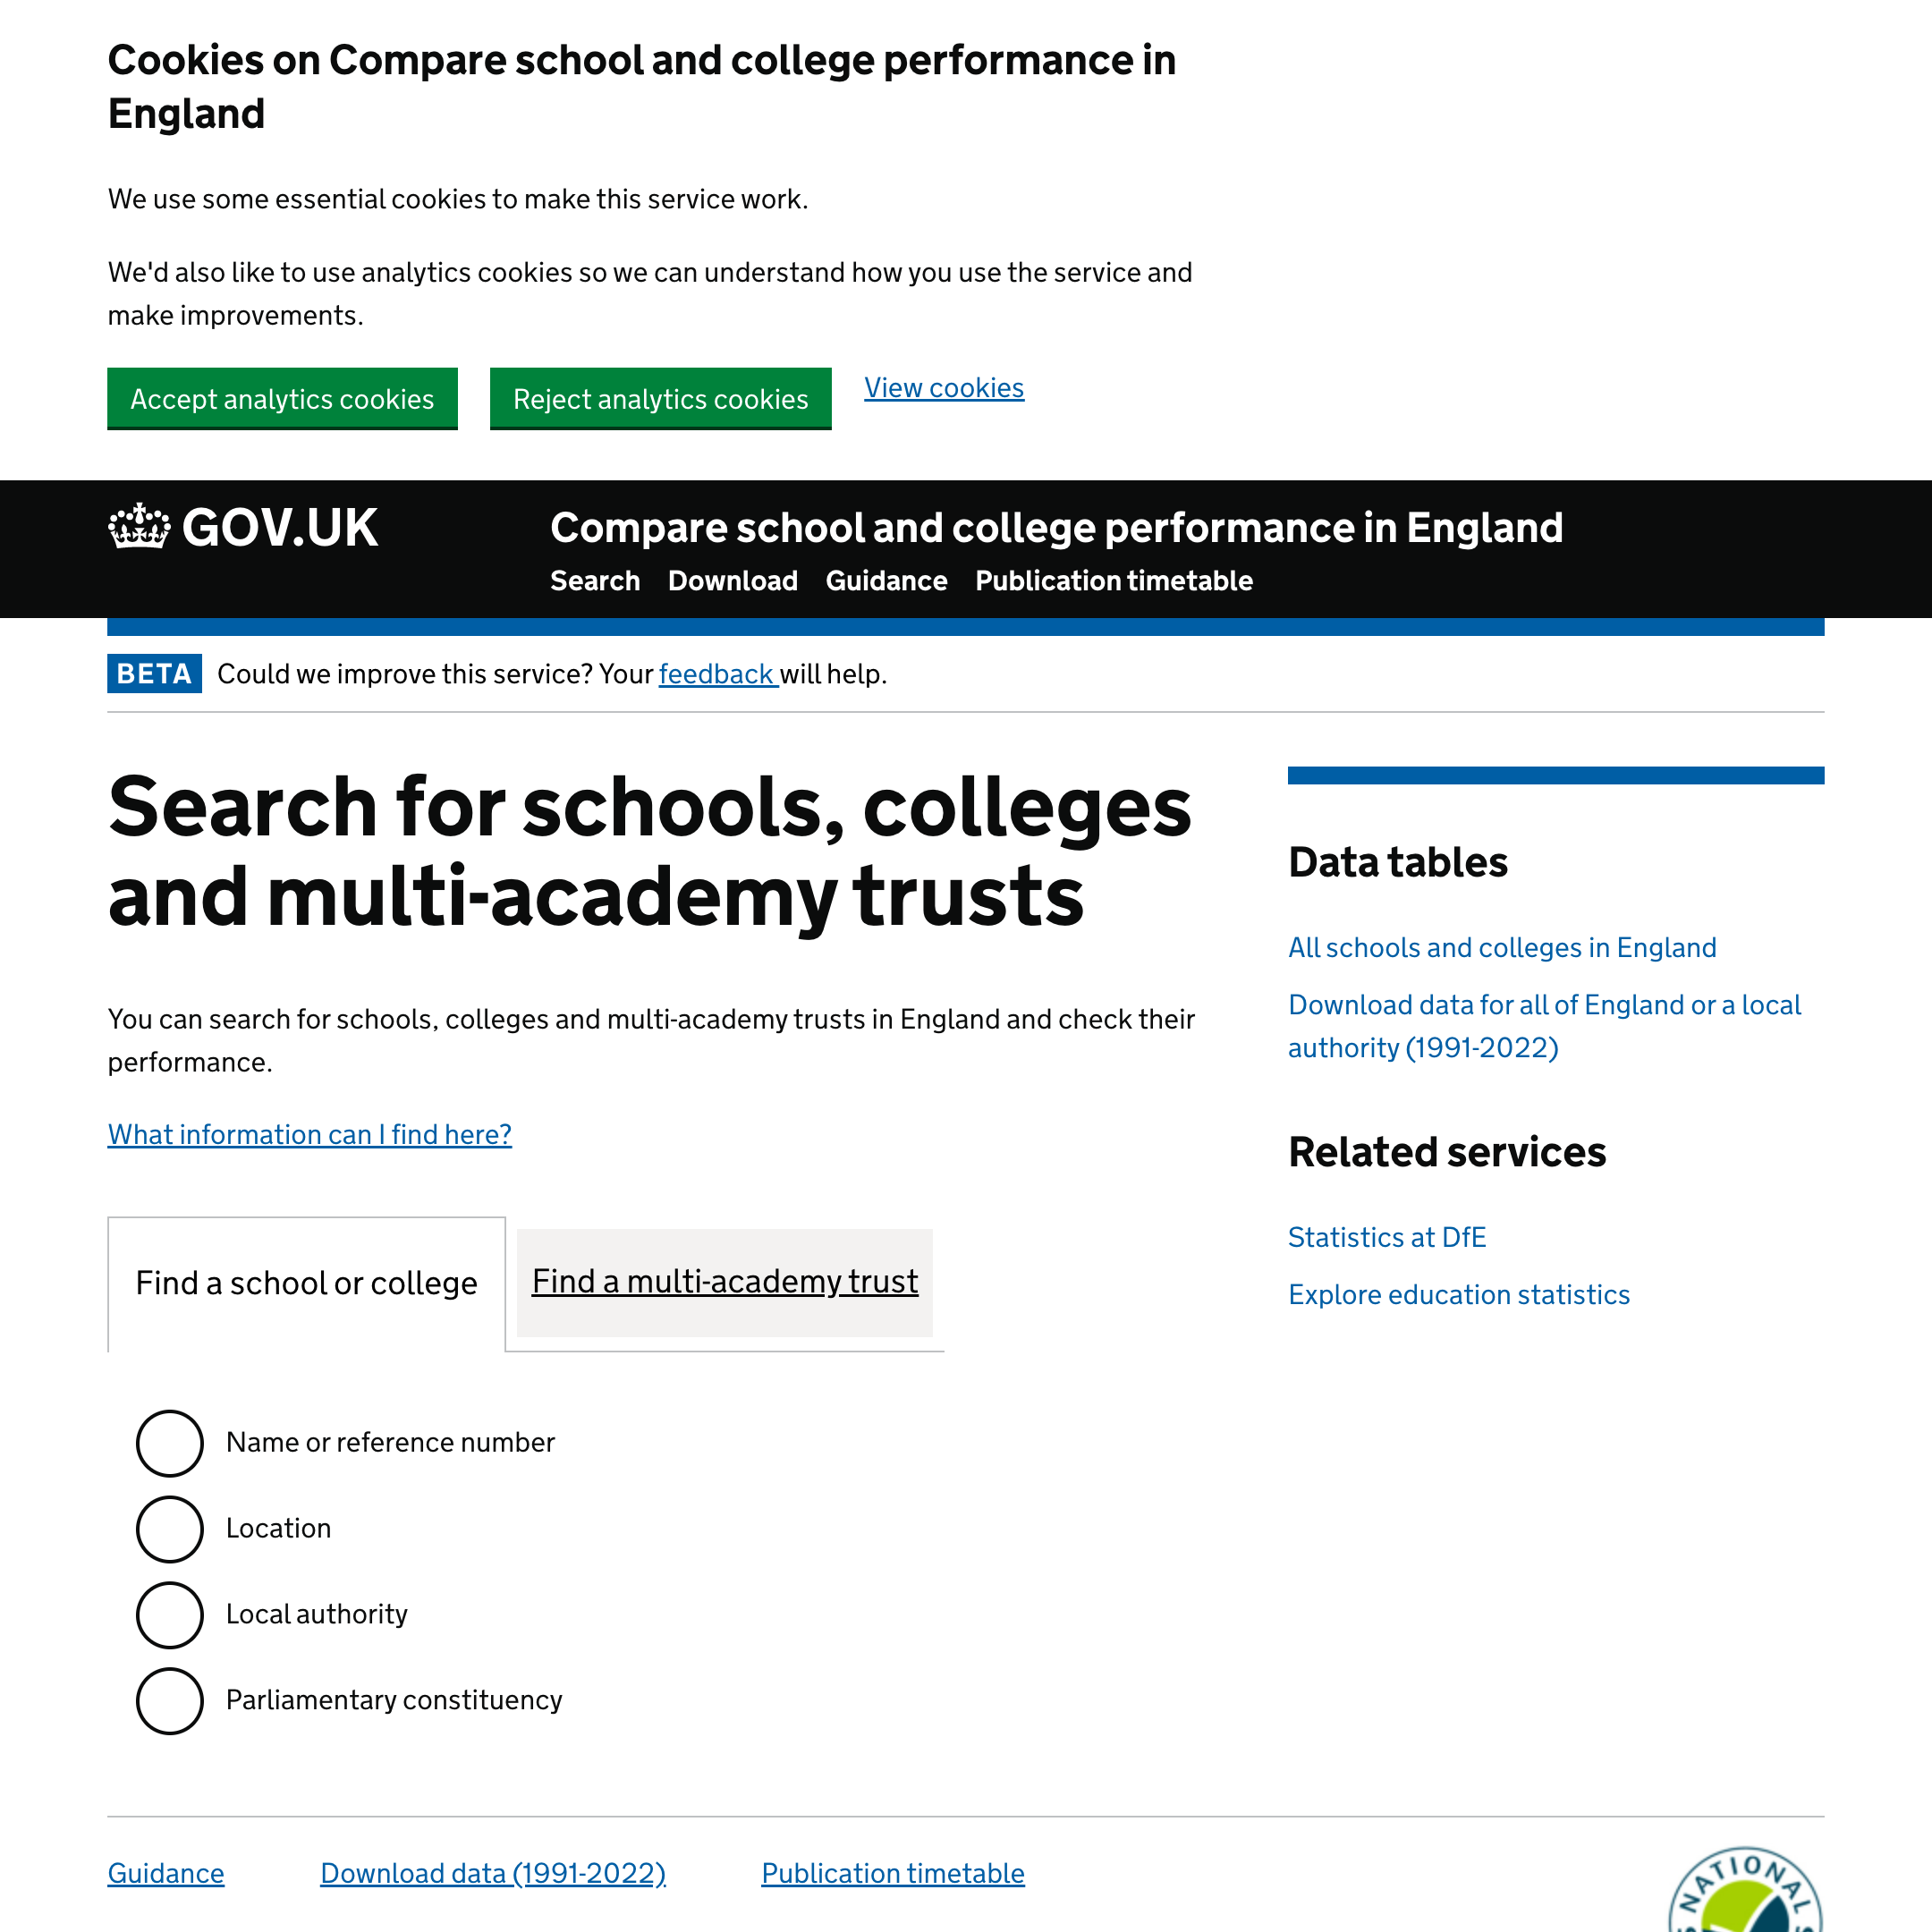 Find school and college performance data in England